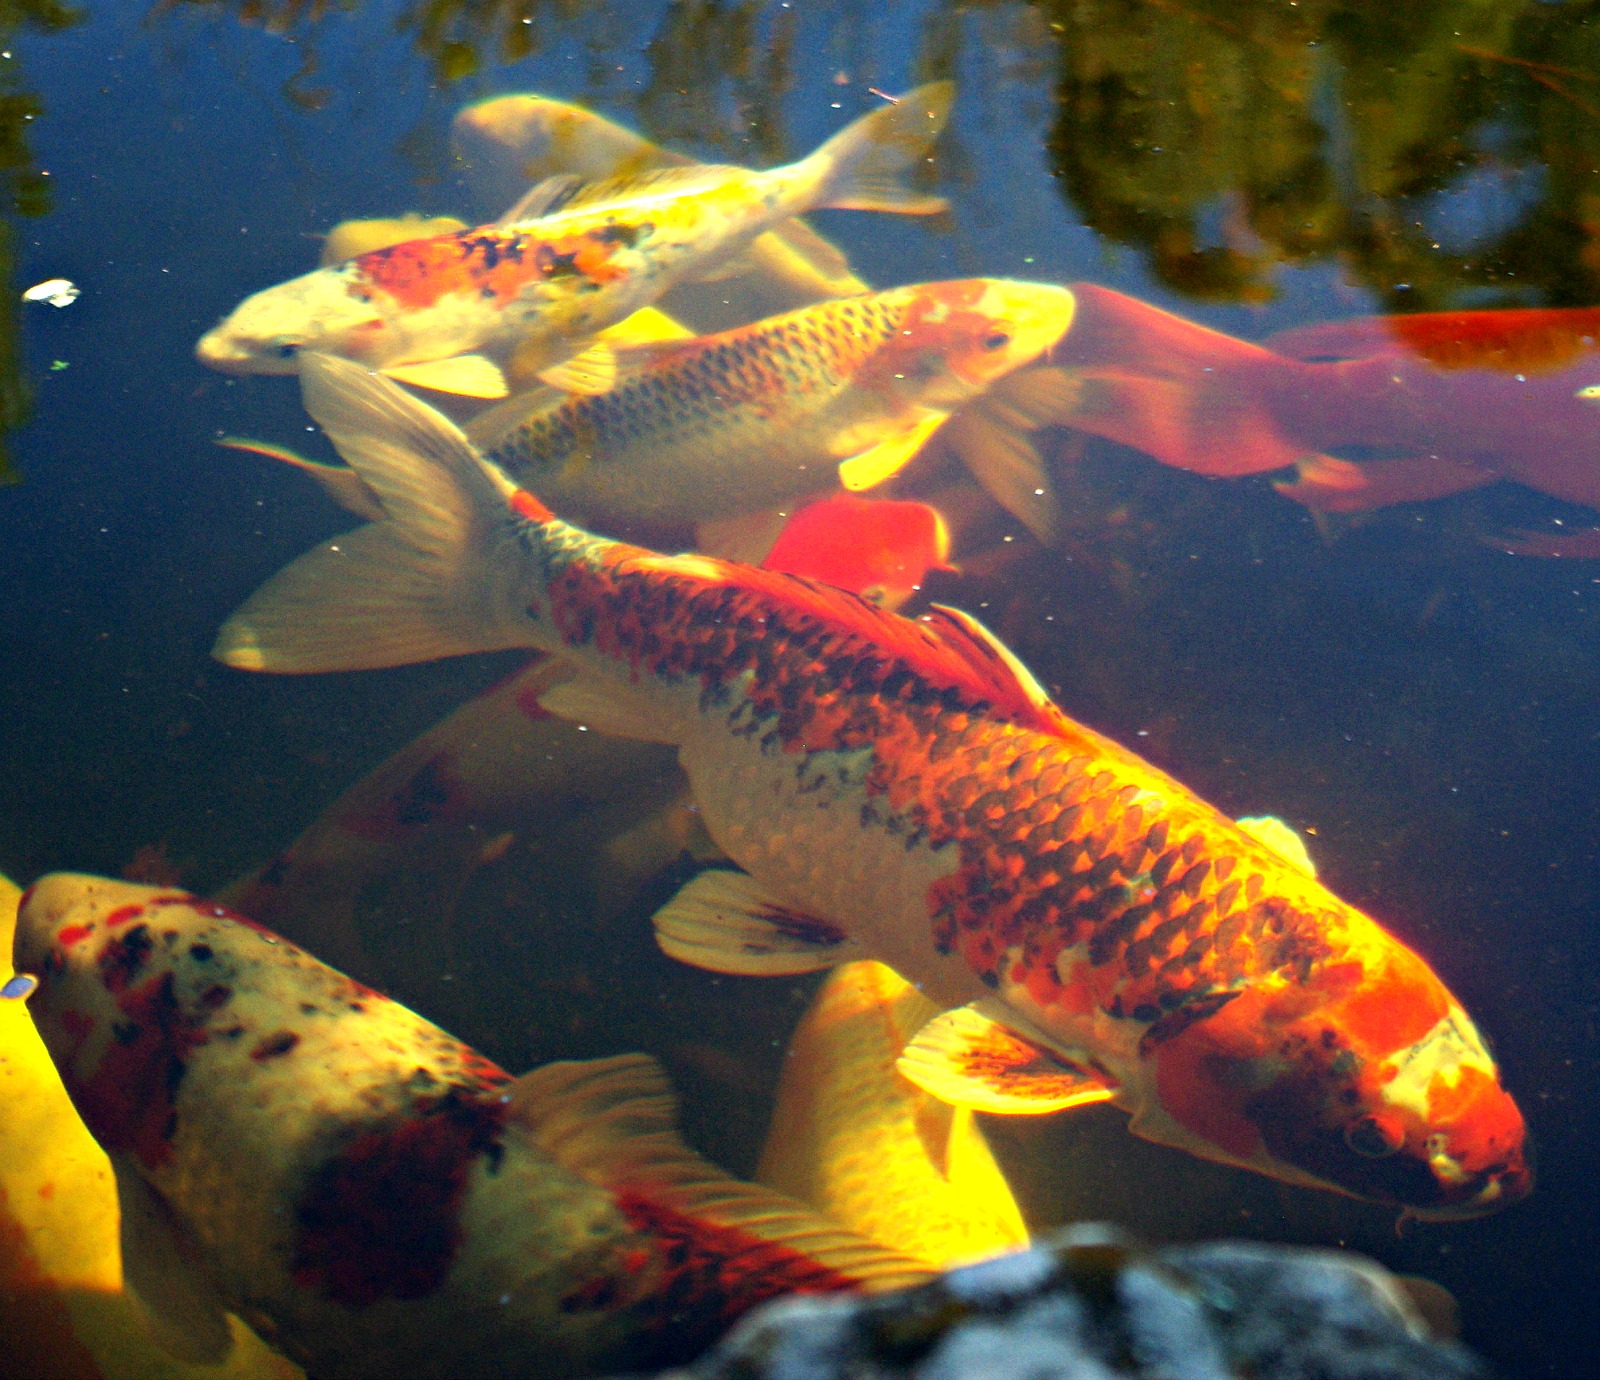 Recognizing the potential of your koi - Windsor Fish Hatchery Online